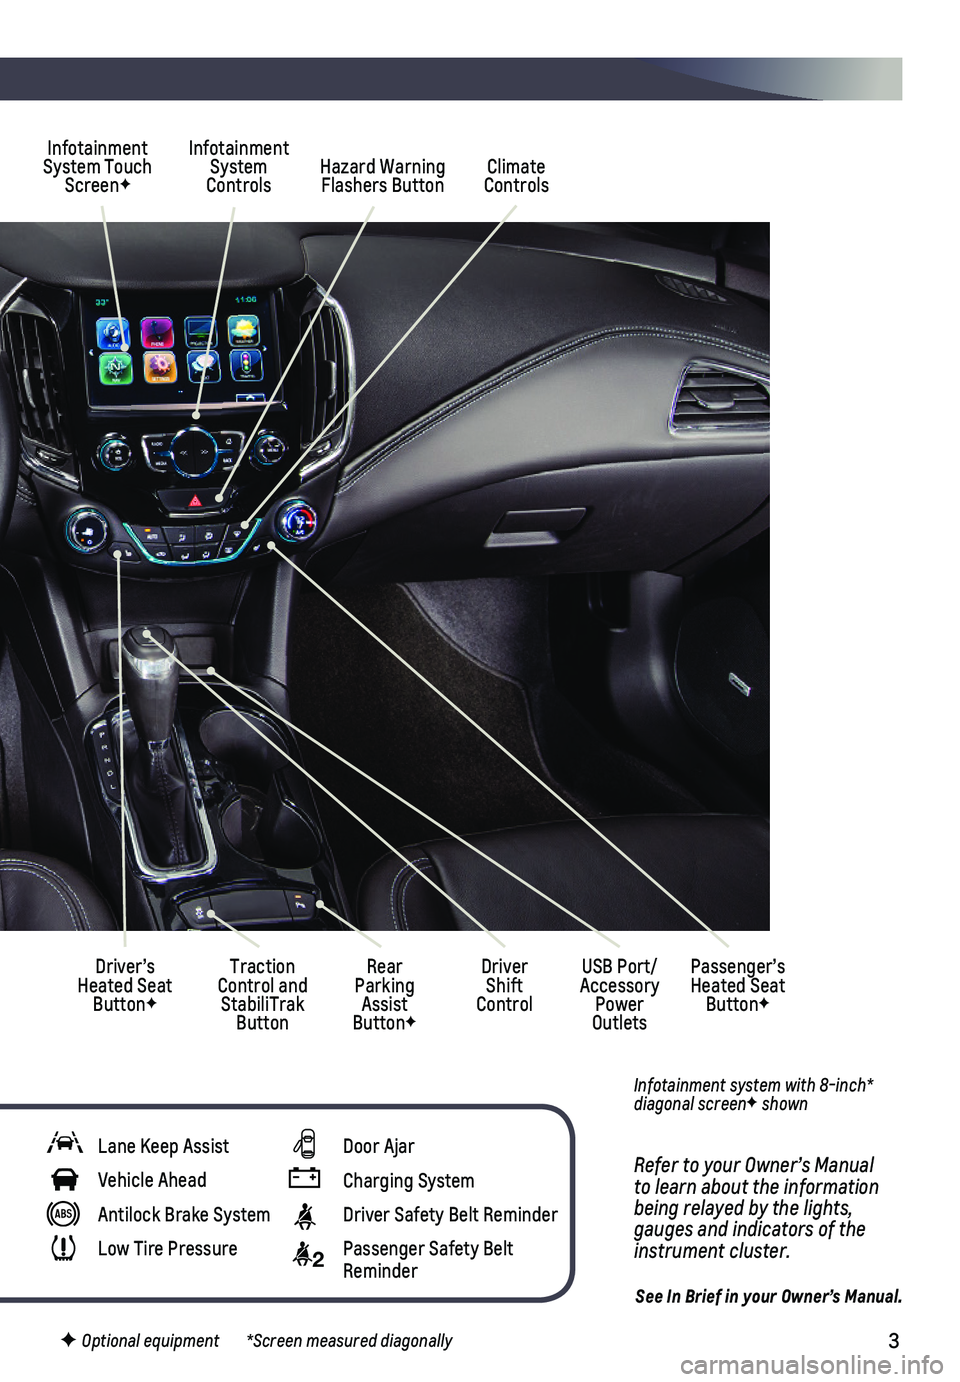 CHEVROLET CRUZE 2018  Get To Know Guide 3
Refer to your Owner’s Manual to learn about the information being relayed by the lights, gauges and indicators of the instrument cluster.
See In Brief in your Owner’s Manual.
Infotainment System